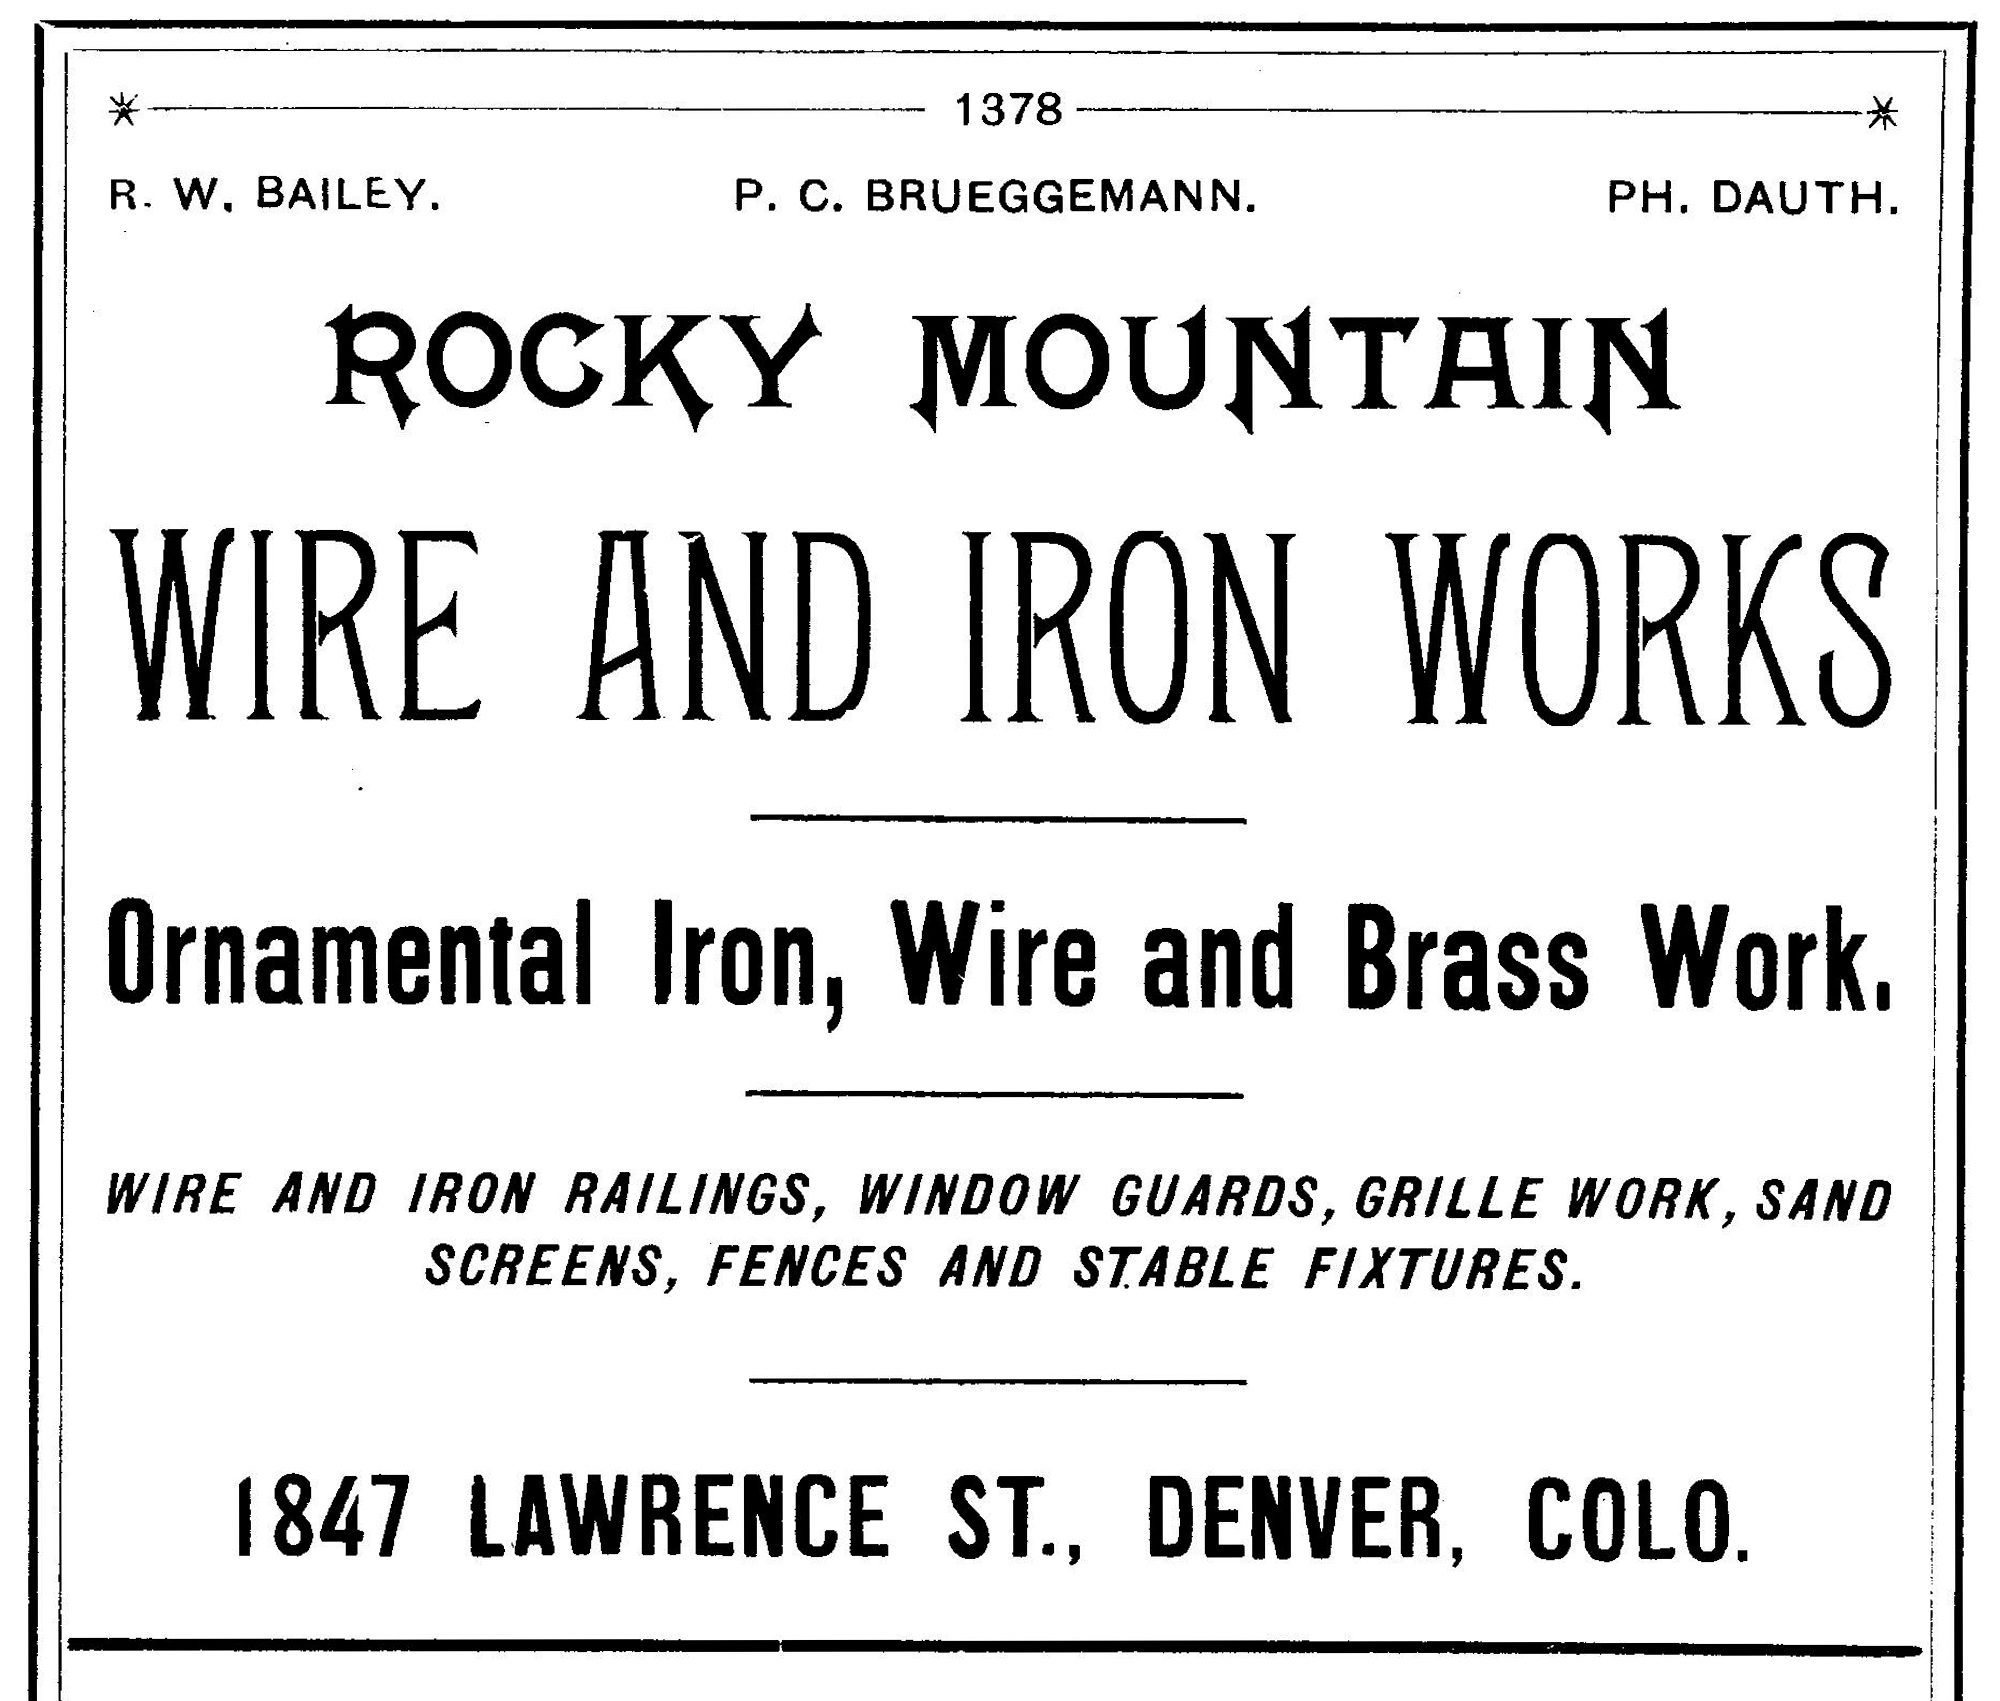 Dauth Family Archive - 1890 - Denver Directory - Philip Dauth Wire and Iron Works Advertisement